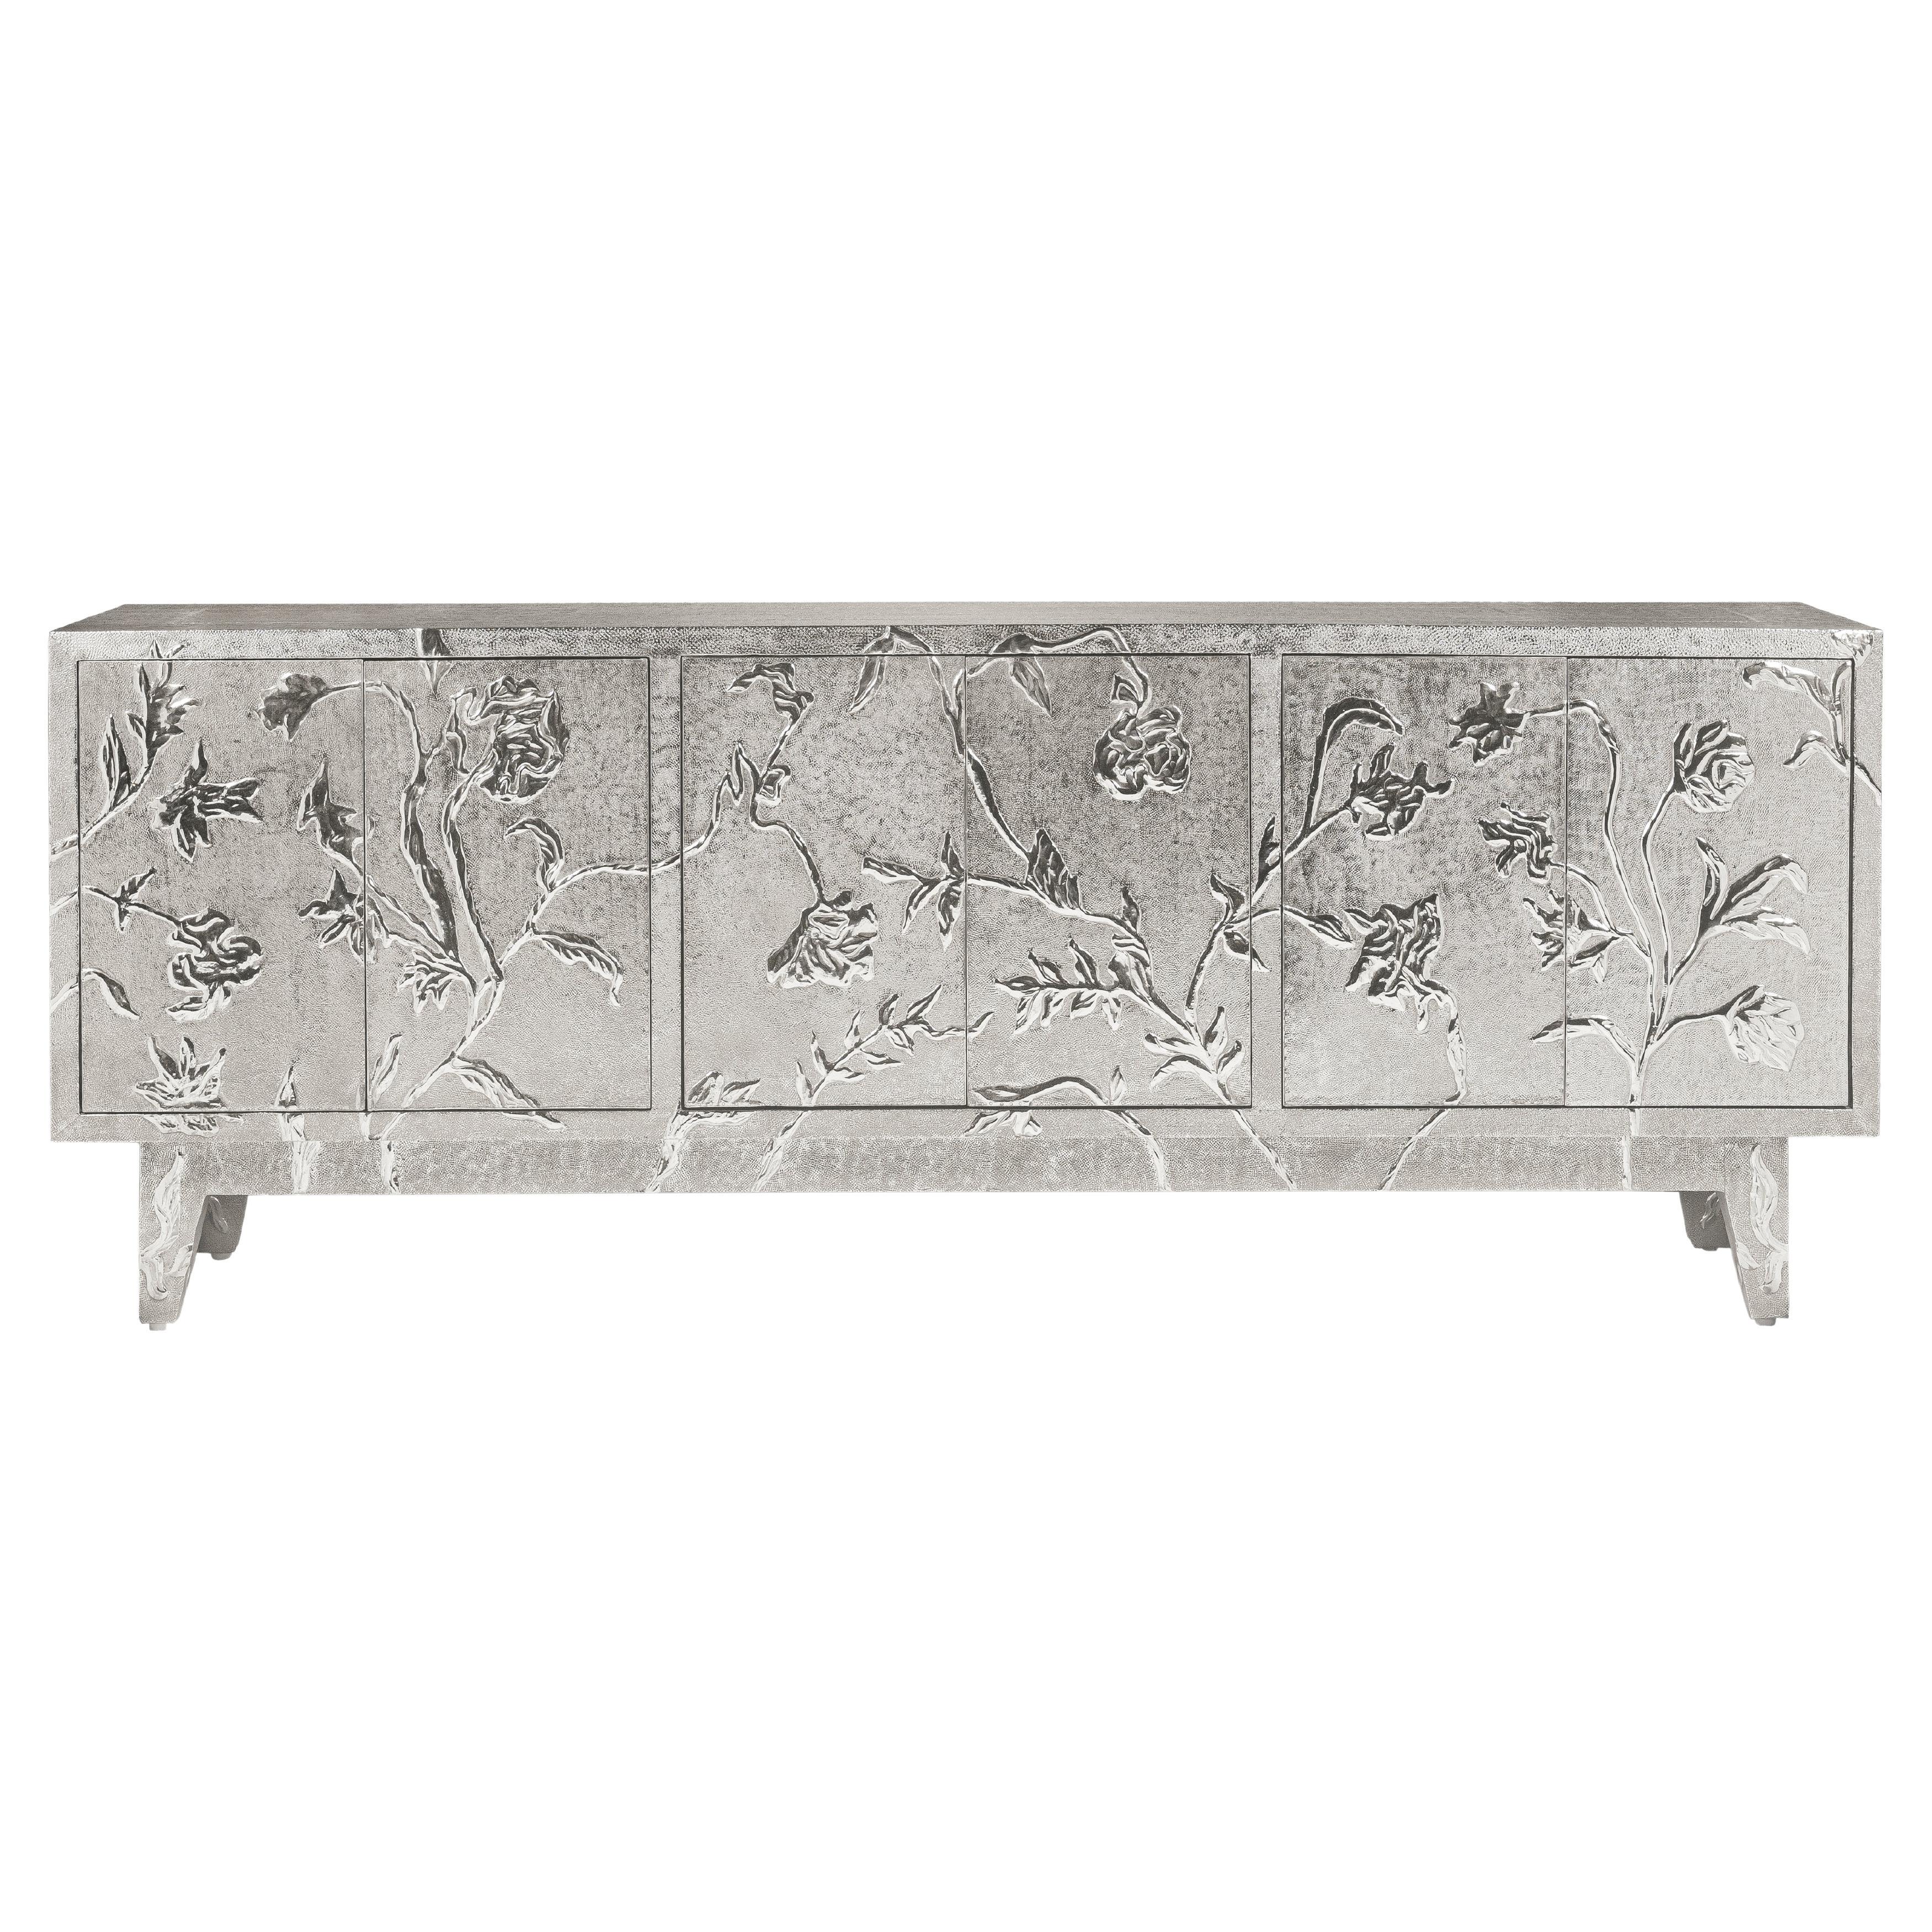 Art Deco Chest of Drawers in Floral Design by Stephanie Odegard For Sale